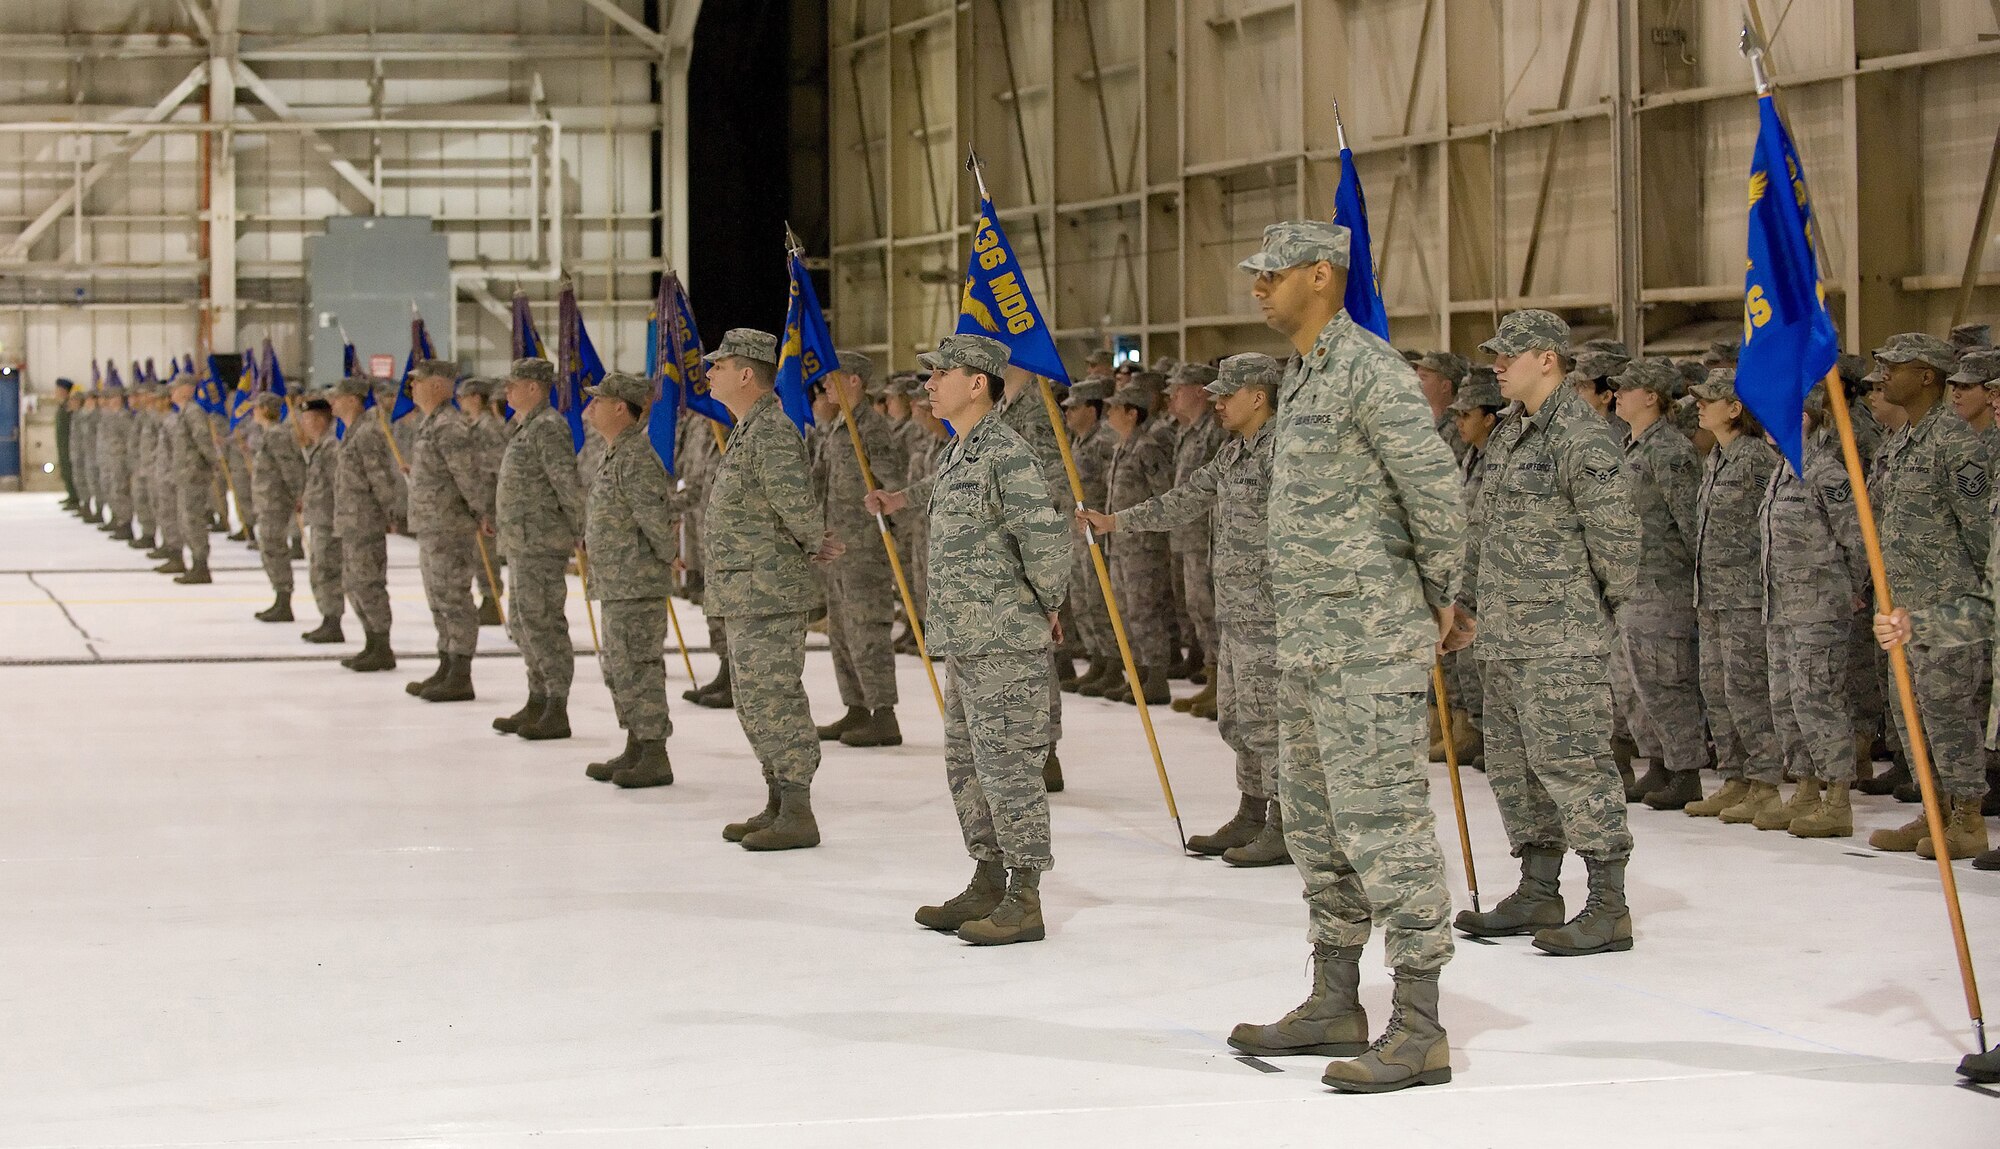 Members of the 436th Airlift Wing stand in formation during the change-of-command ceremony Jan. 9. Col. Manson O. Morris assumed command of the Eagle Wing from Col. Steven B. Harrison. (U.S. Air Force Photo/Jason Minto)